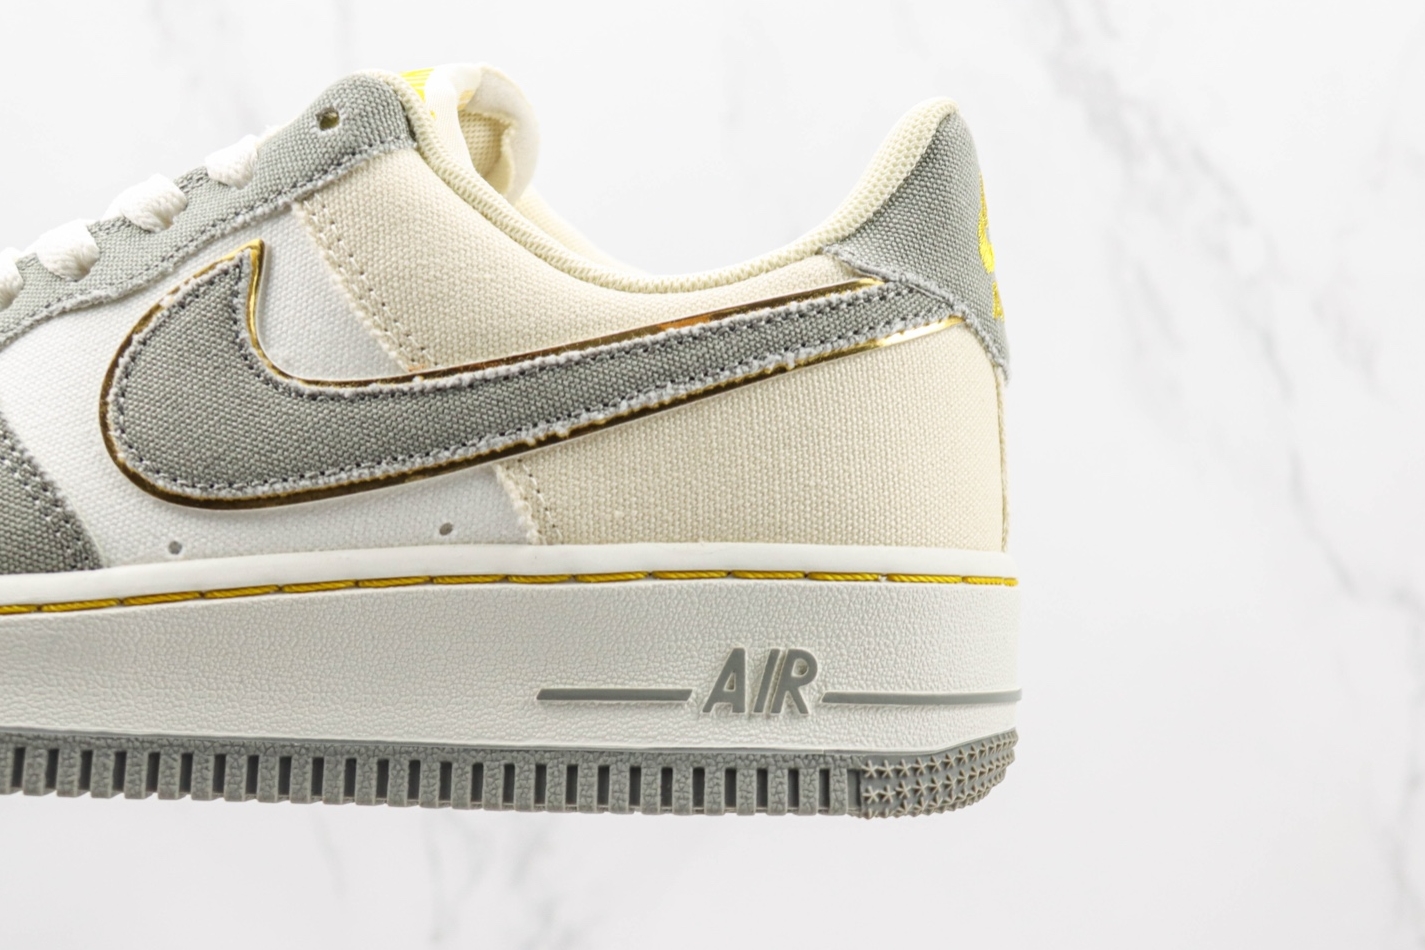 Nike Air Force 1 07 Low Grey Metallic Gold White 315122-666 - Stylish and Versatile Sneakers